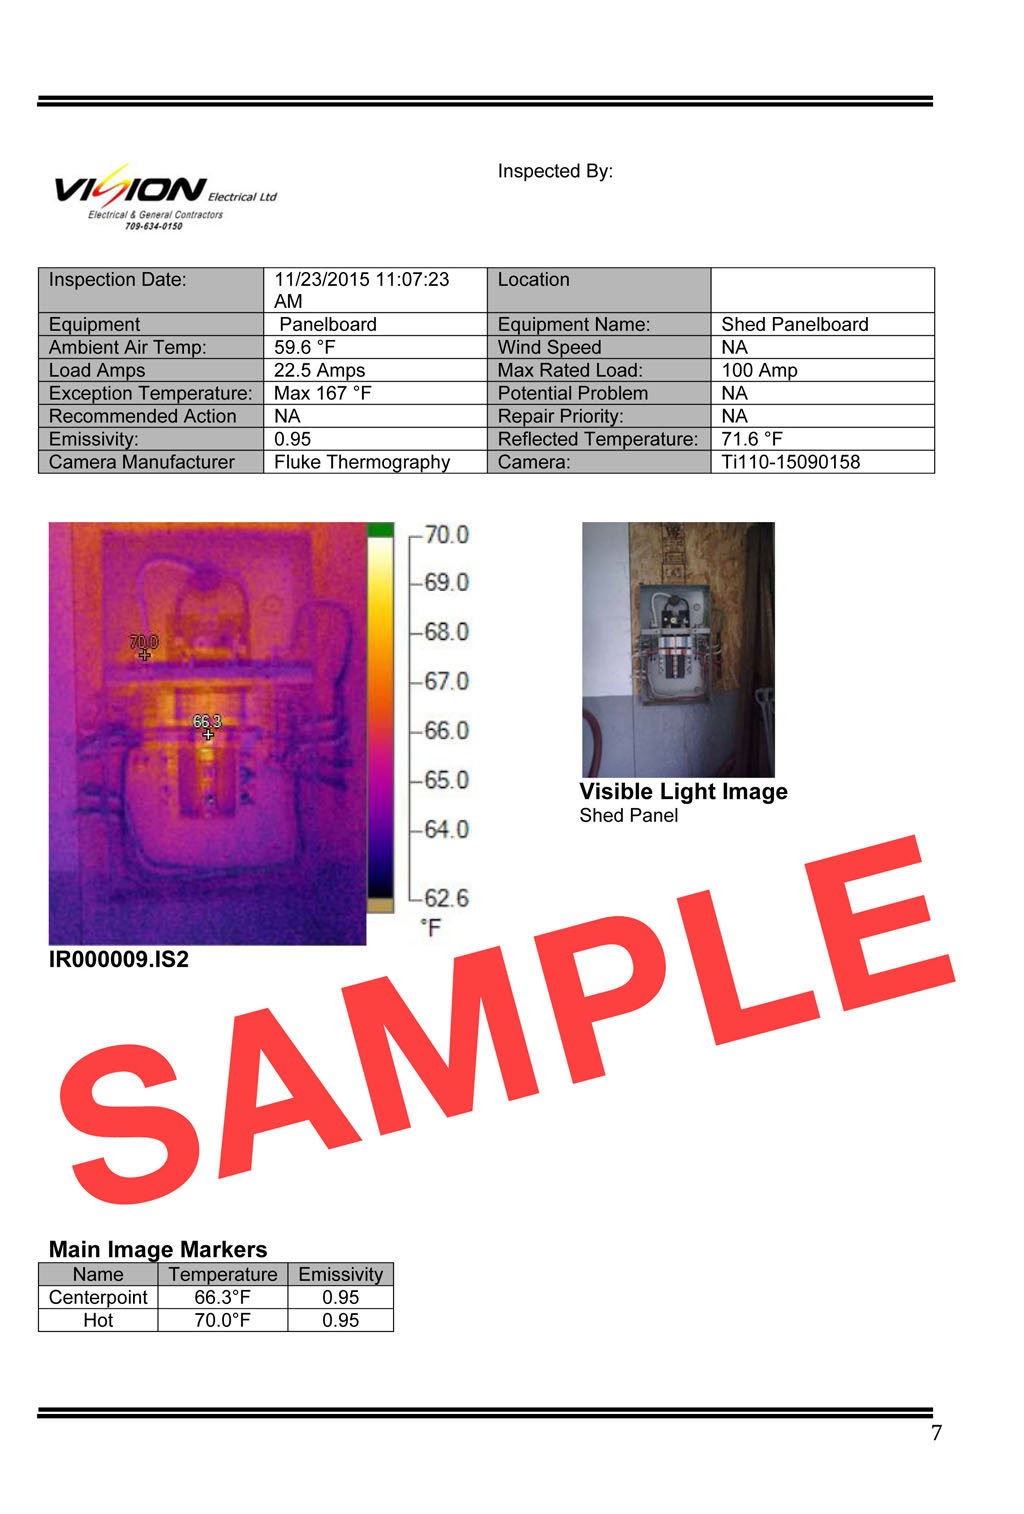 Thermo Image Report